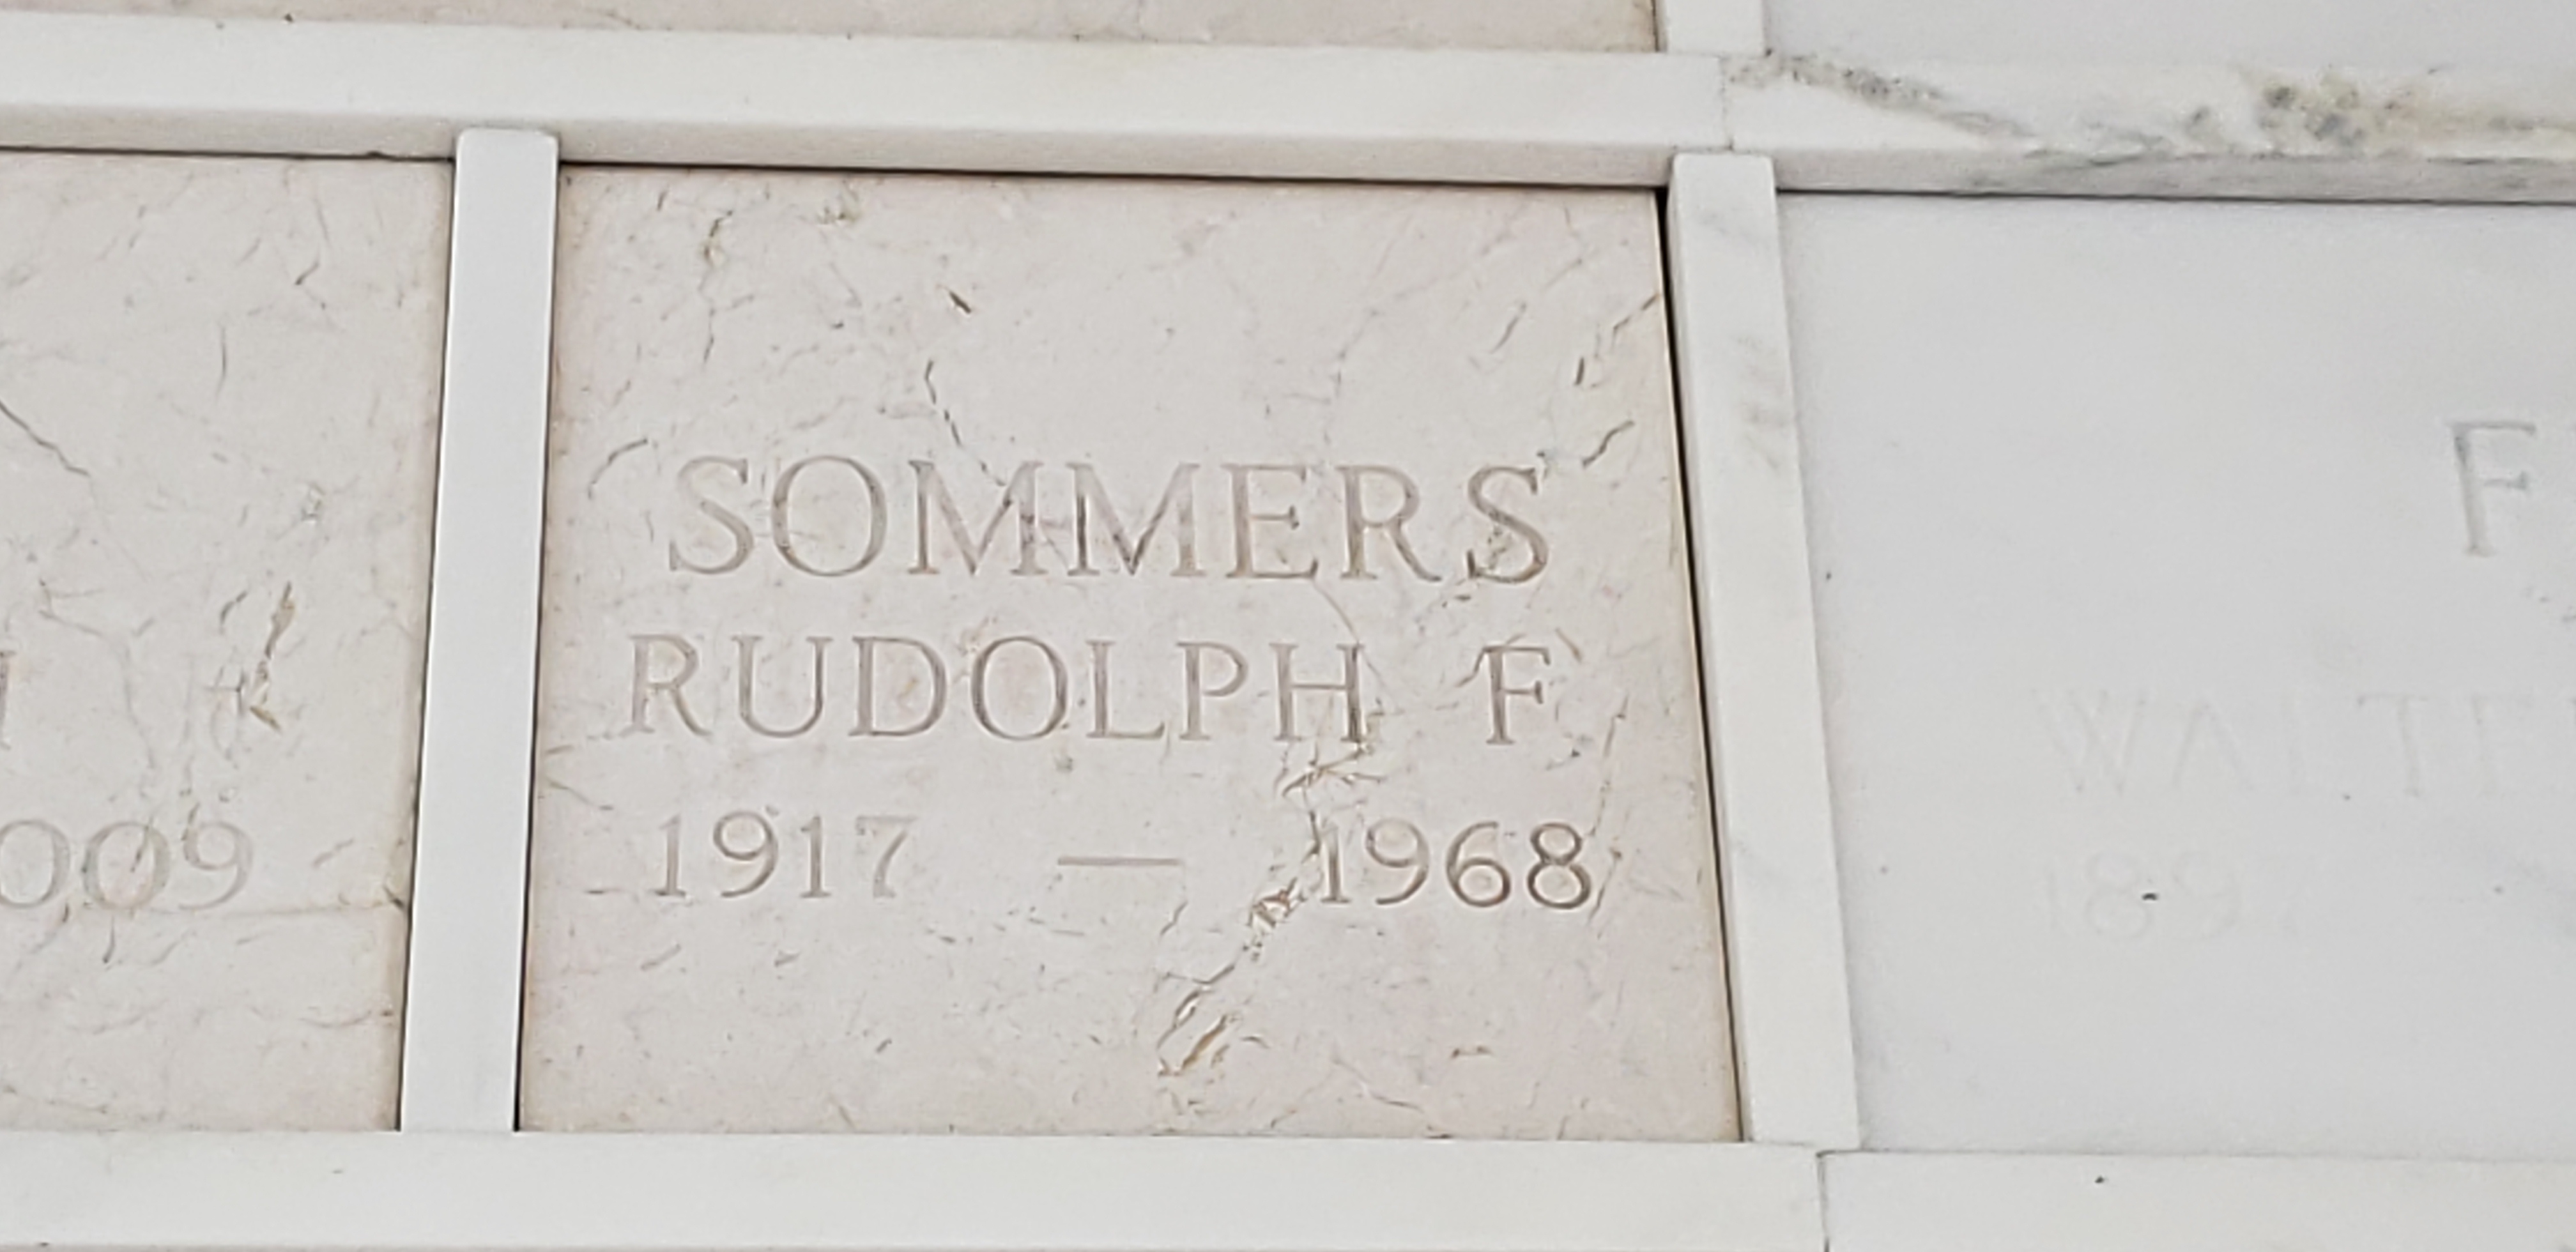 Rudolph F Sommers